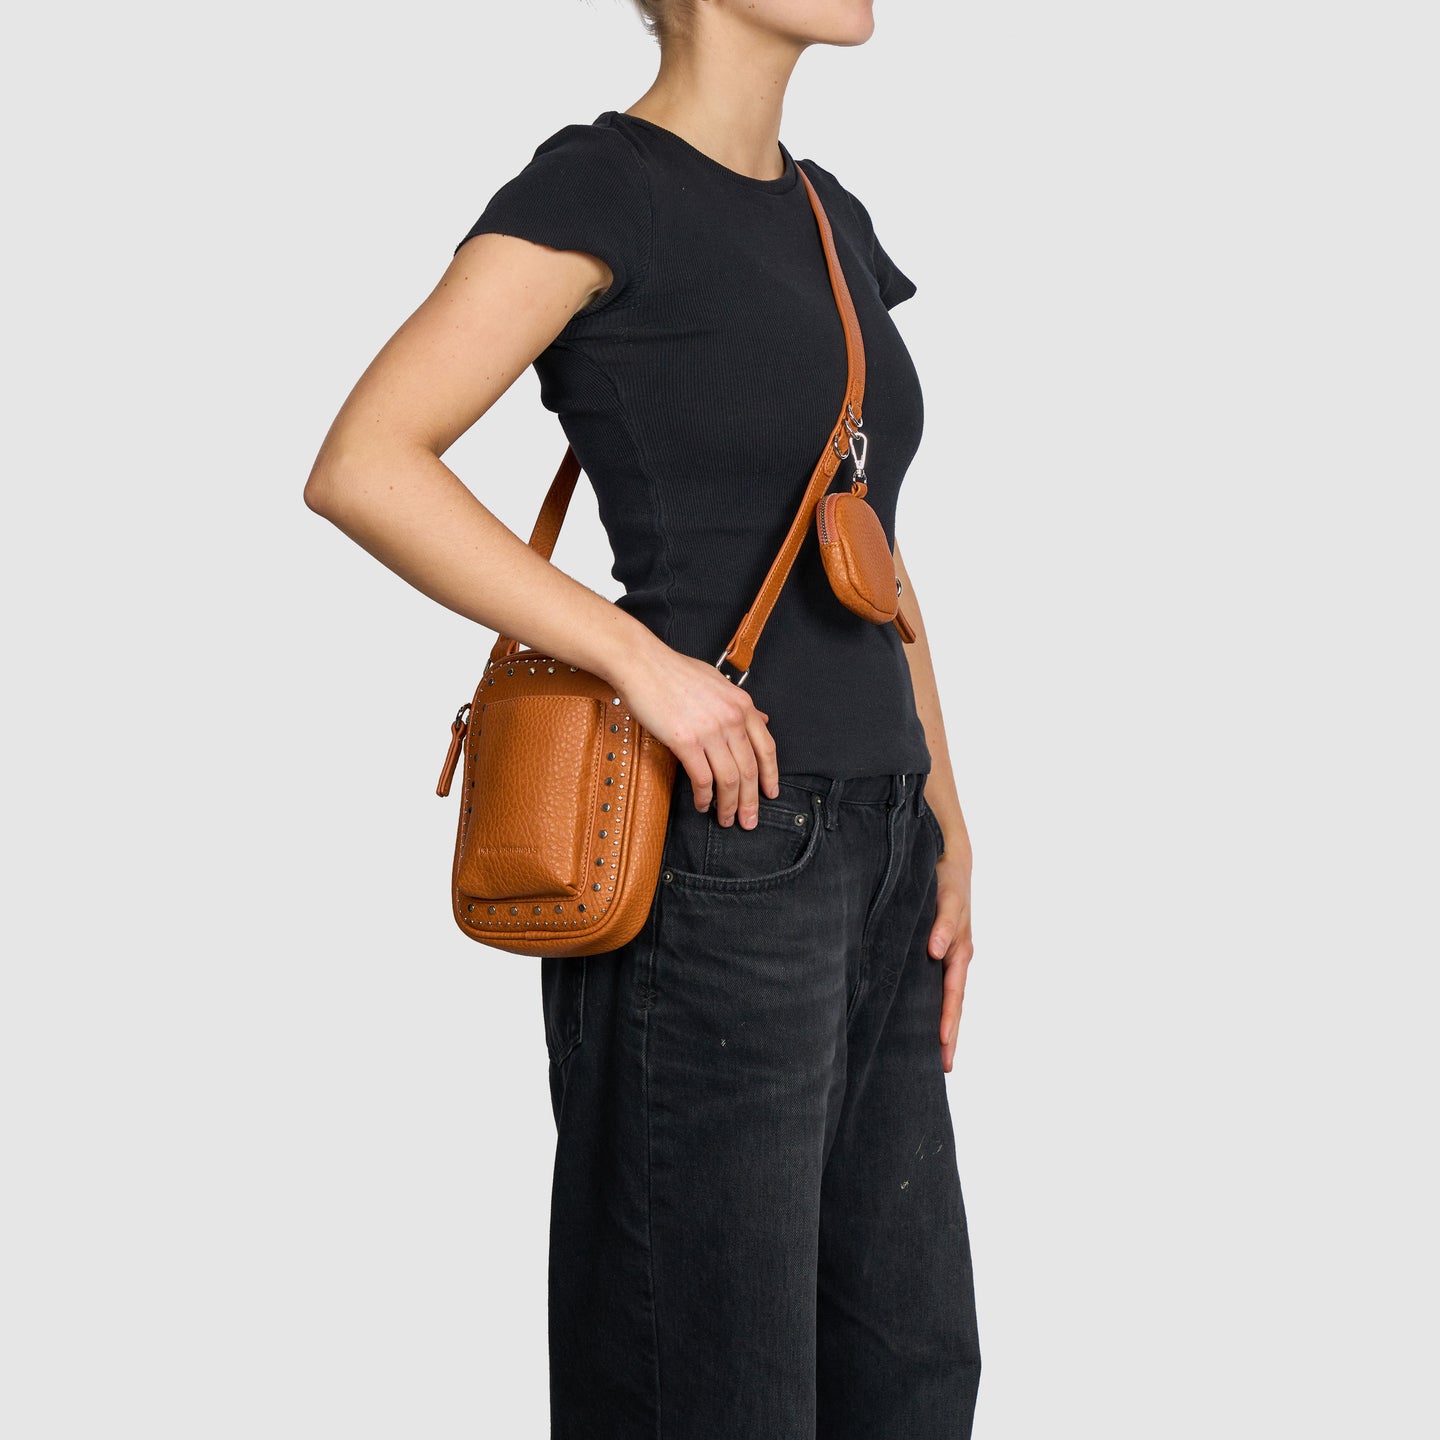 7 Types Of Bags For Women】▷ CRUSH LEATHER GOODS